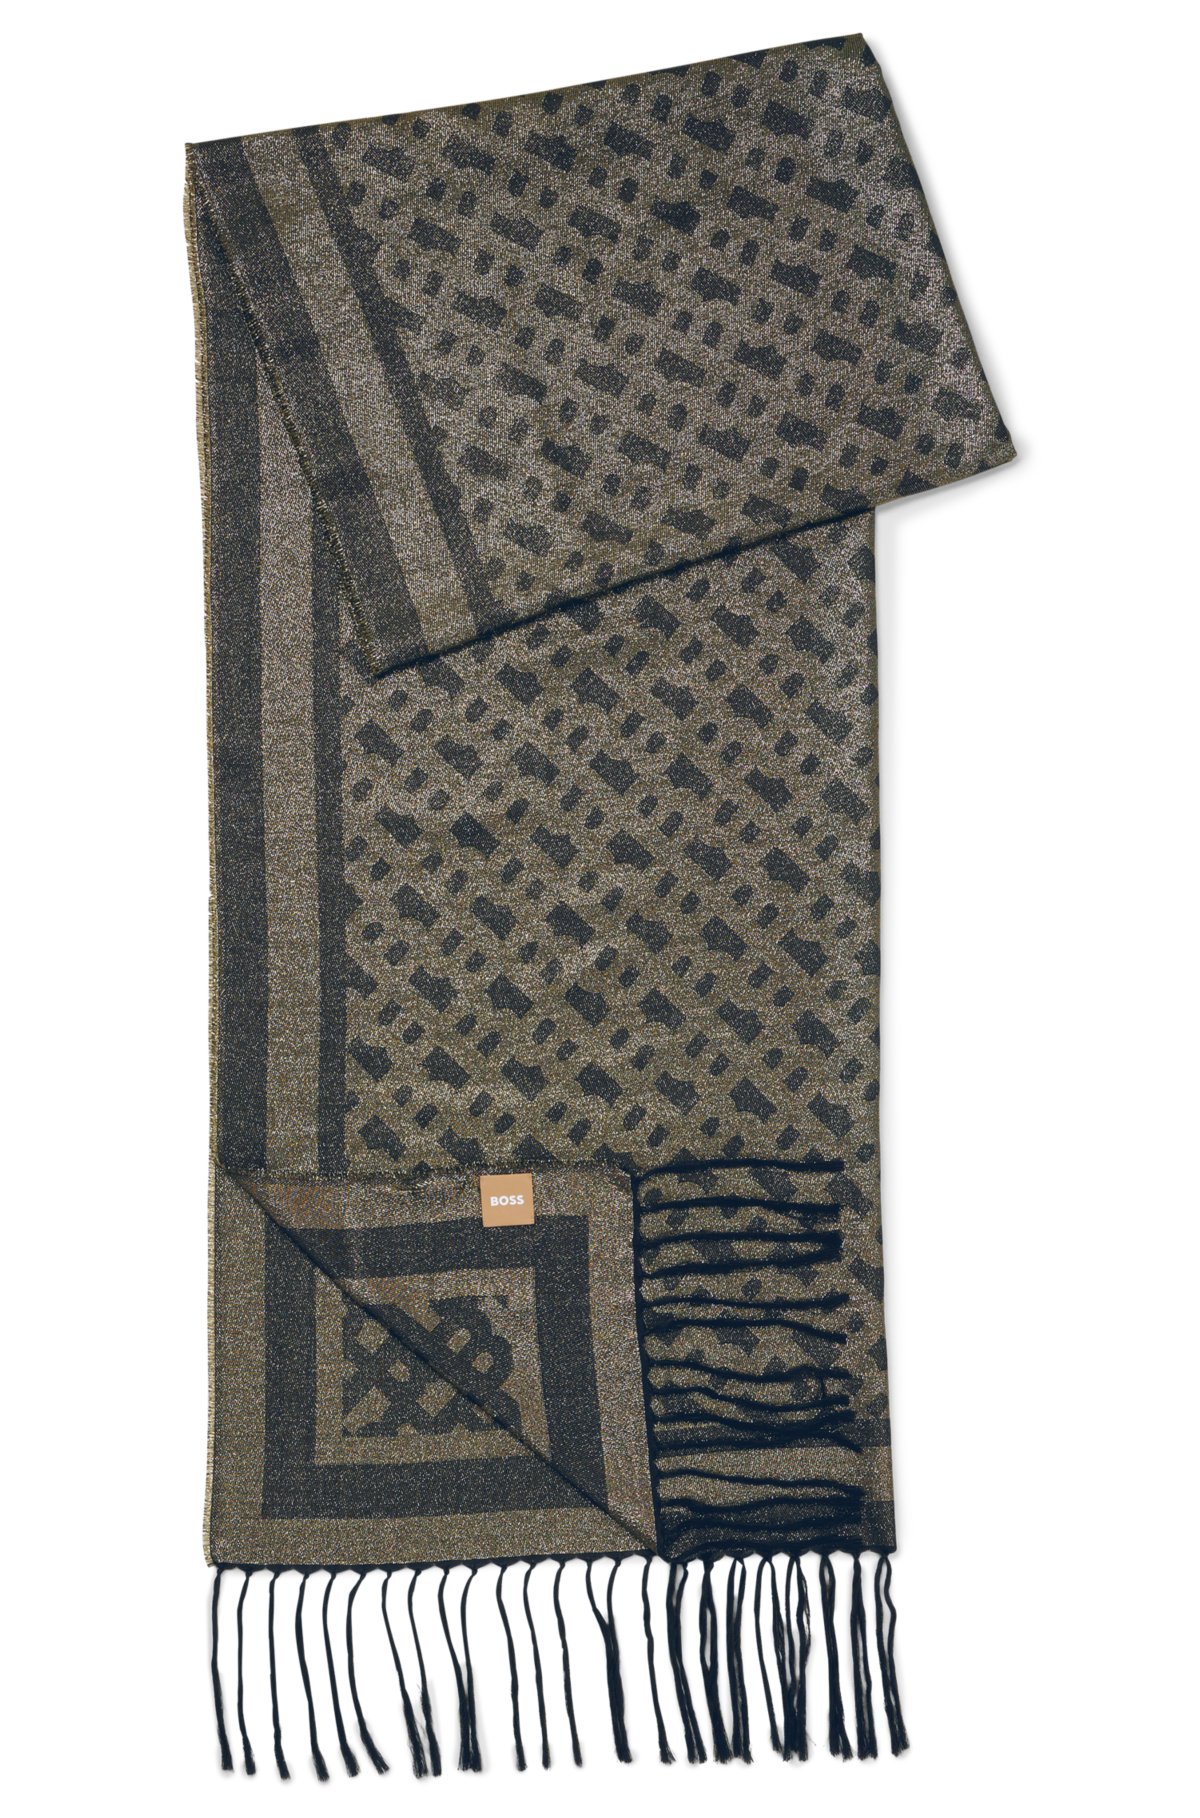 BOSS - Monogram-patterned scarf with fringed ends